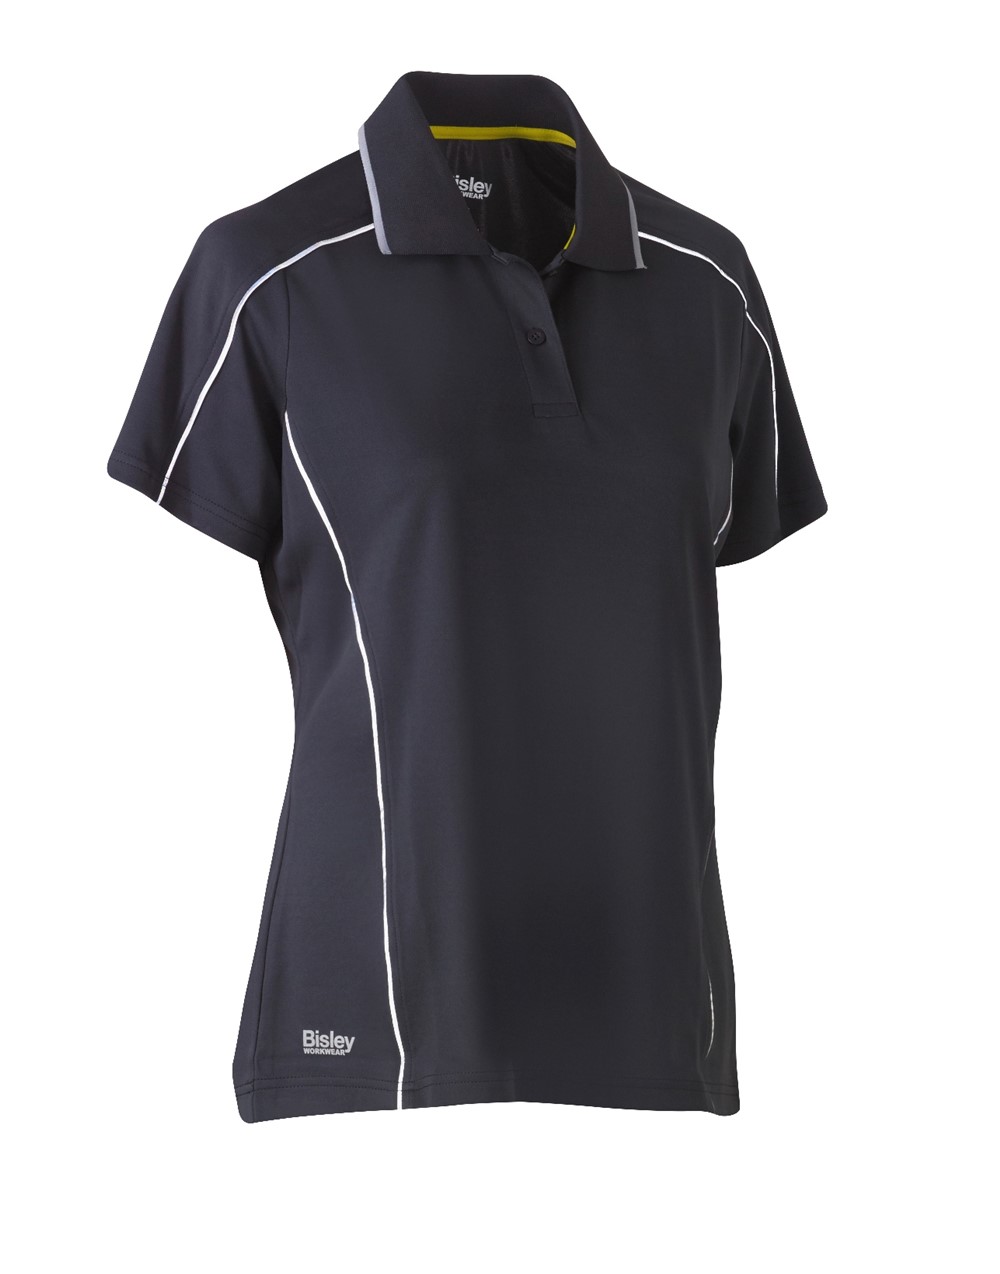 WOMEN'S COOL MESH POLO WITH REFLECTIVE PIPING CHARCOAL S10